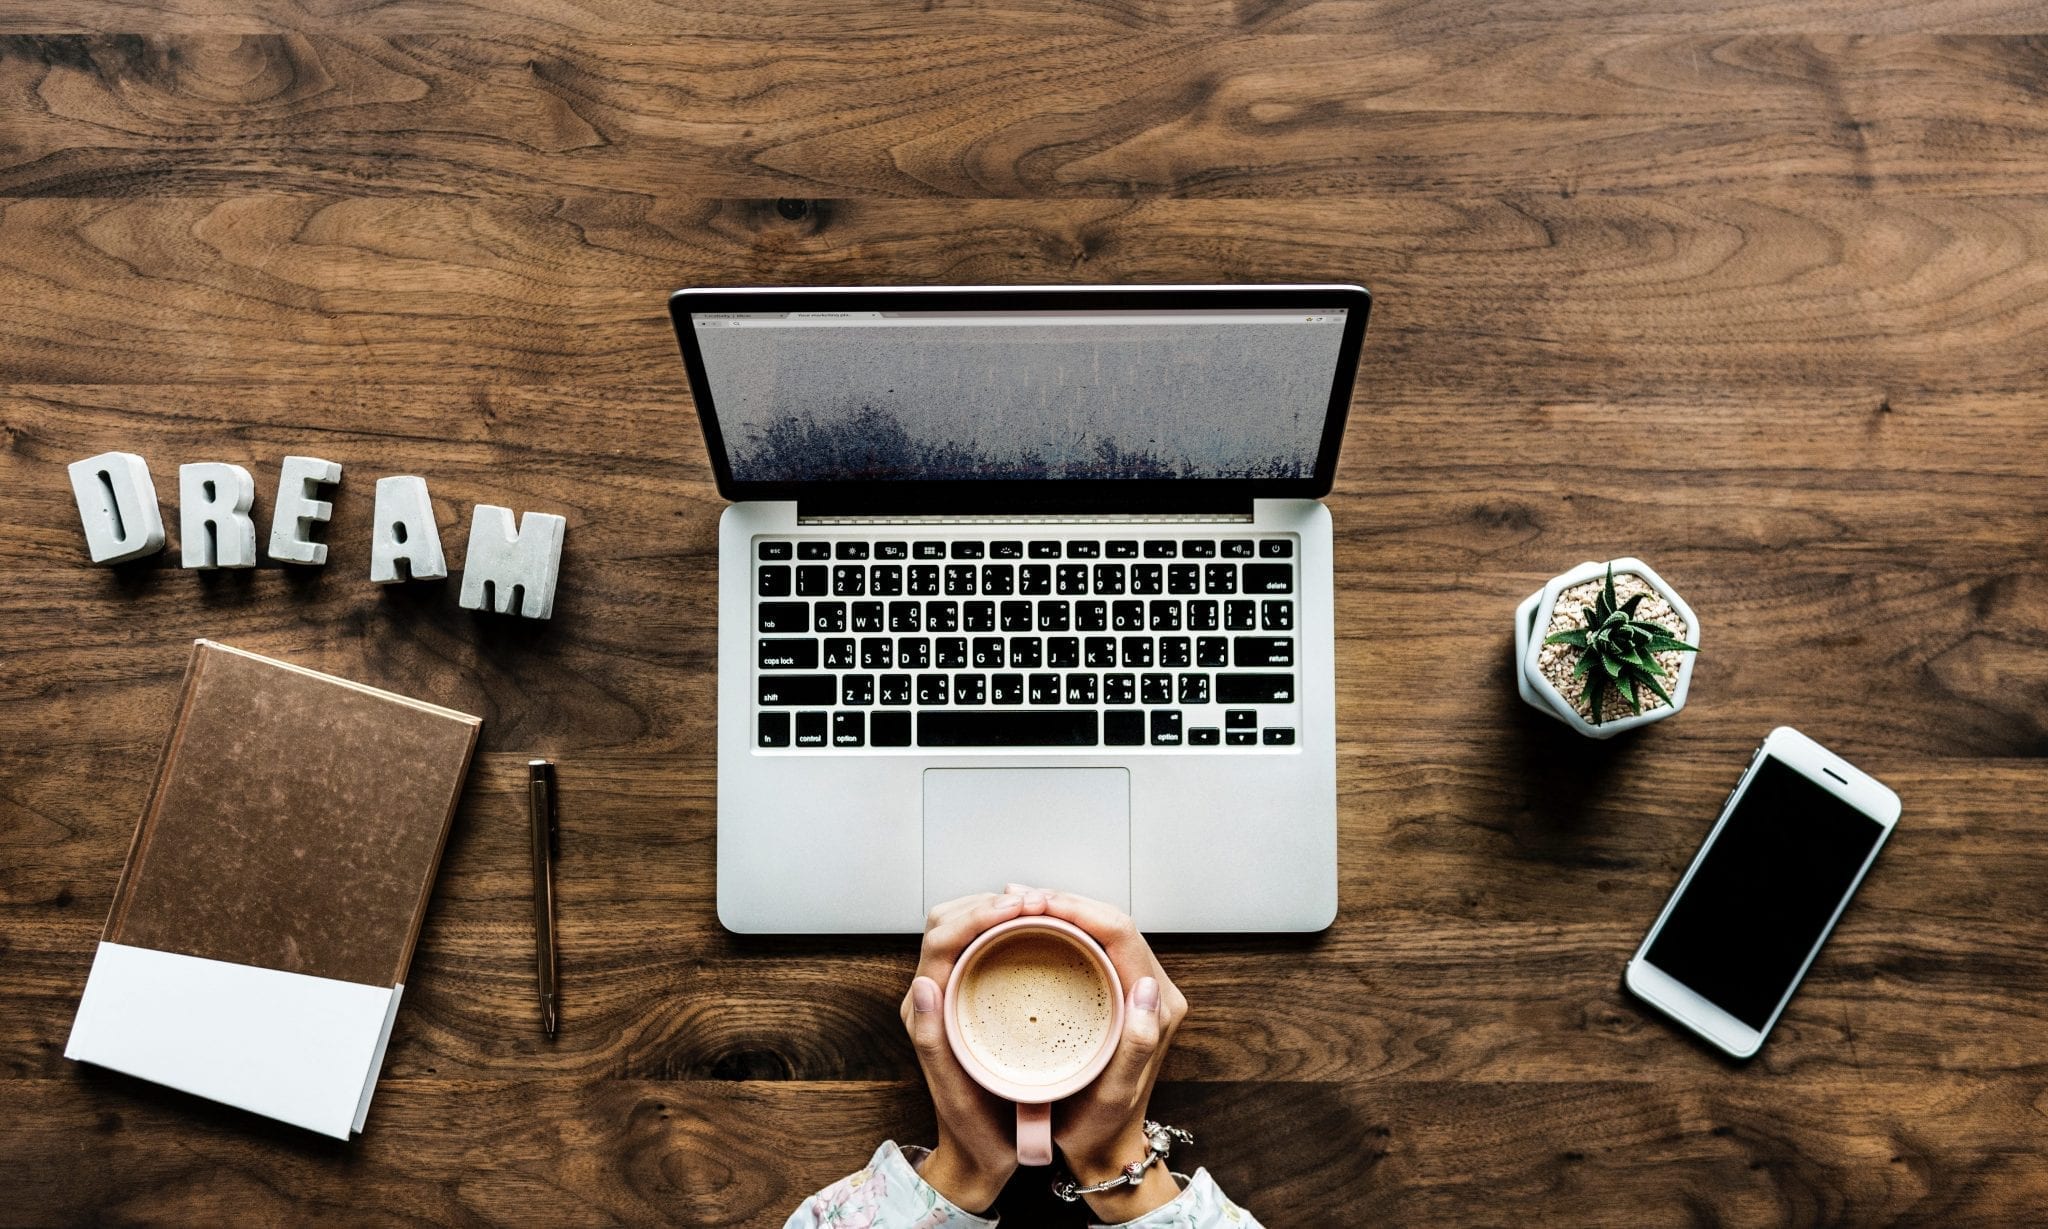 Woman sitting at table with laptop, coffee, and a sign saying “Dream;” image by Rawpixel, via Unsplash.com.